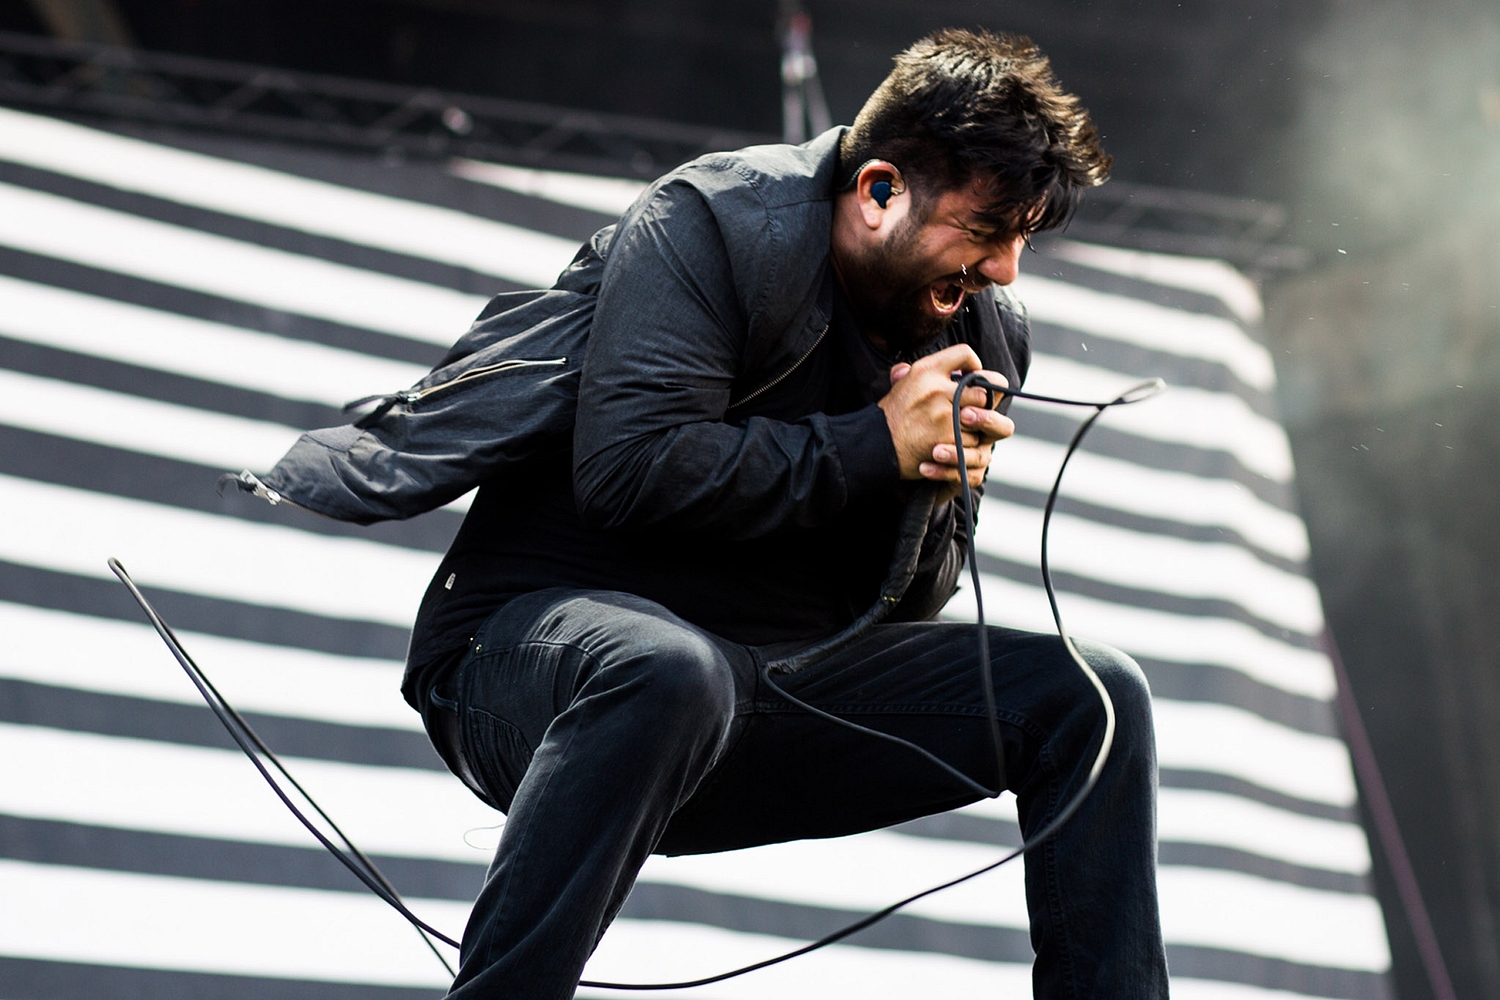 Deftones announce one-off headline show at Wembley’s SSE Arena